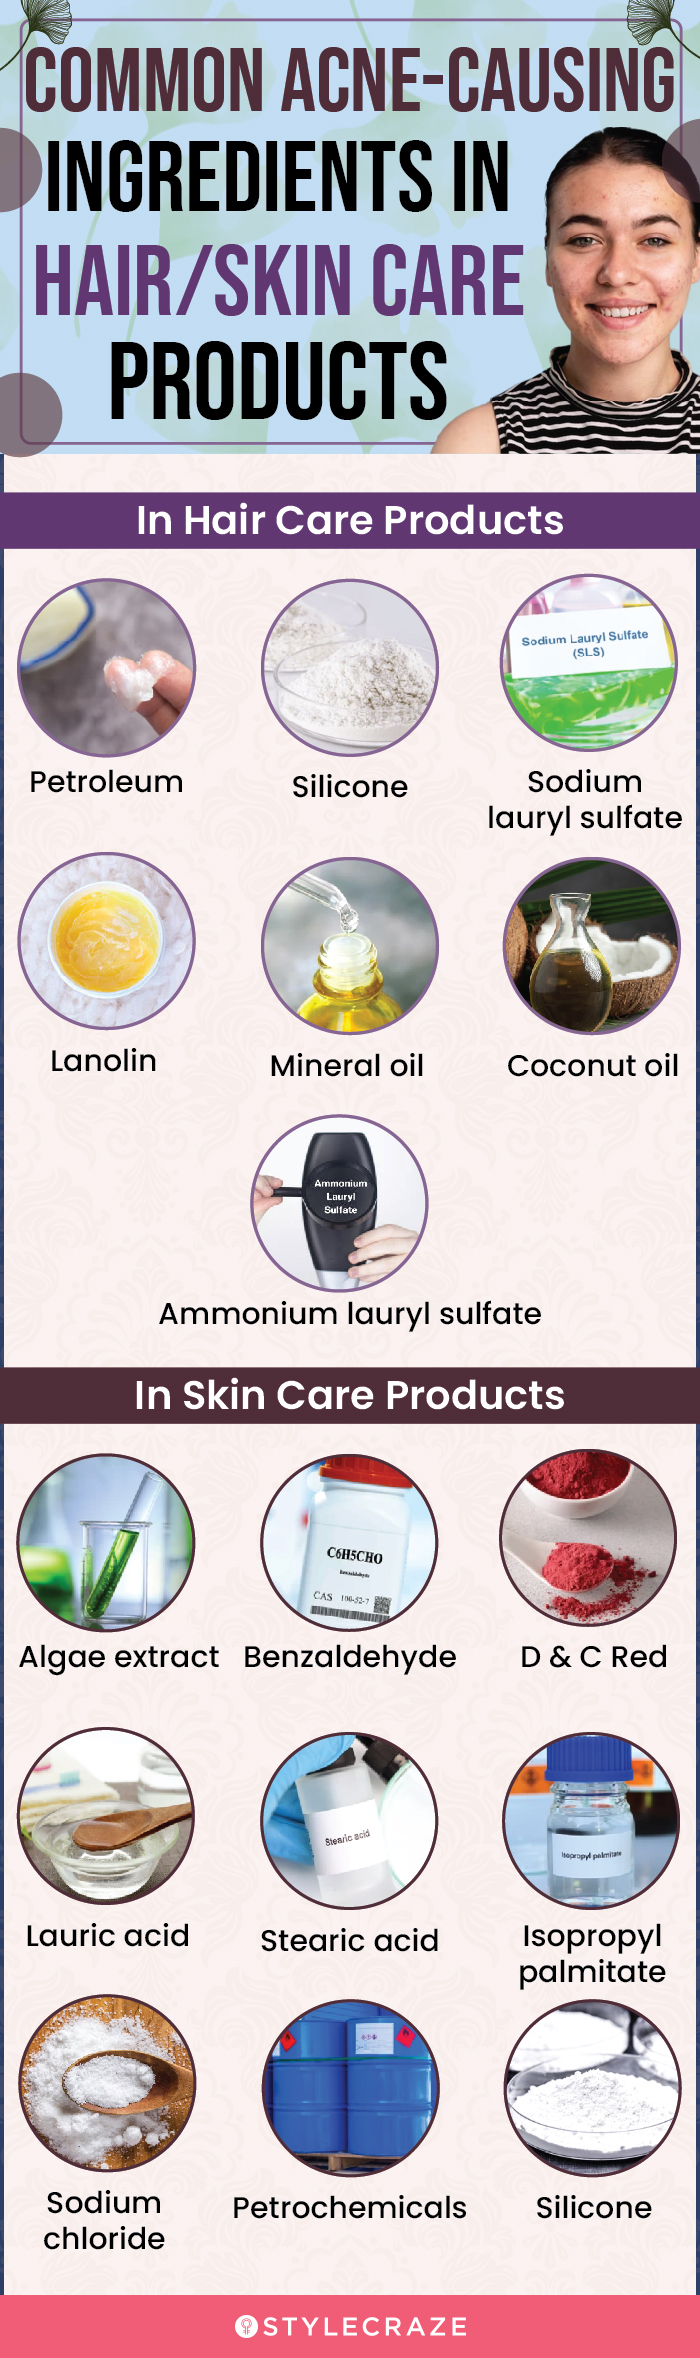 common acne causing ingredients in hair skin care products (infographic)